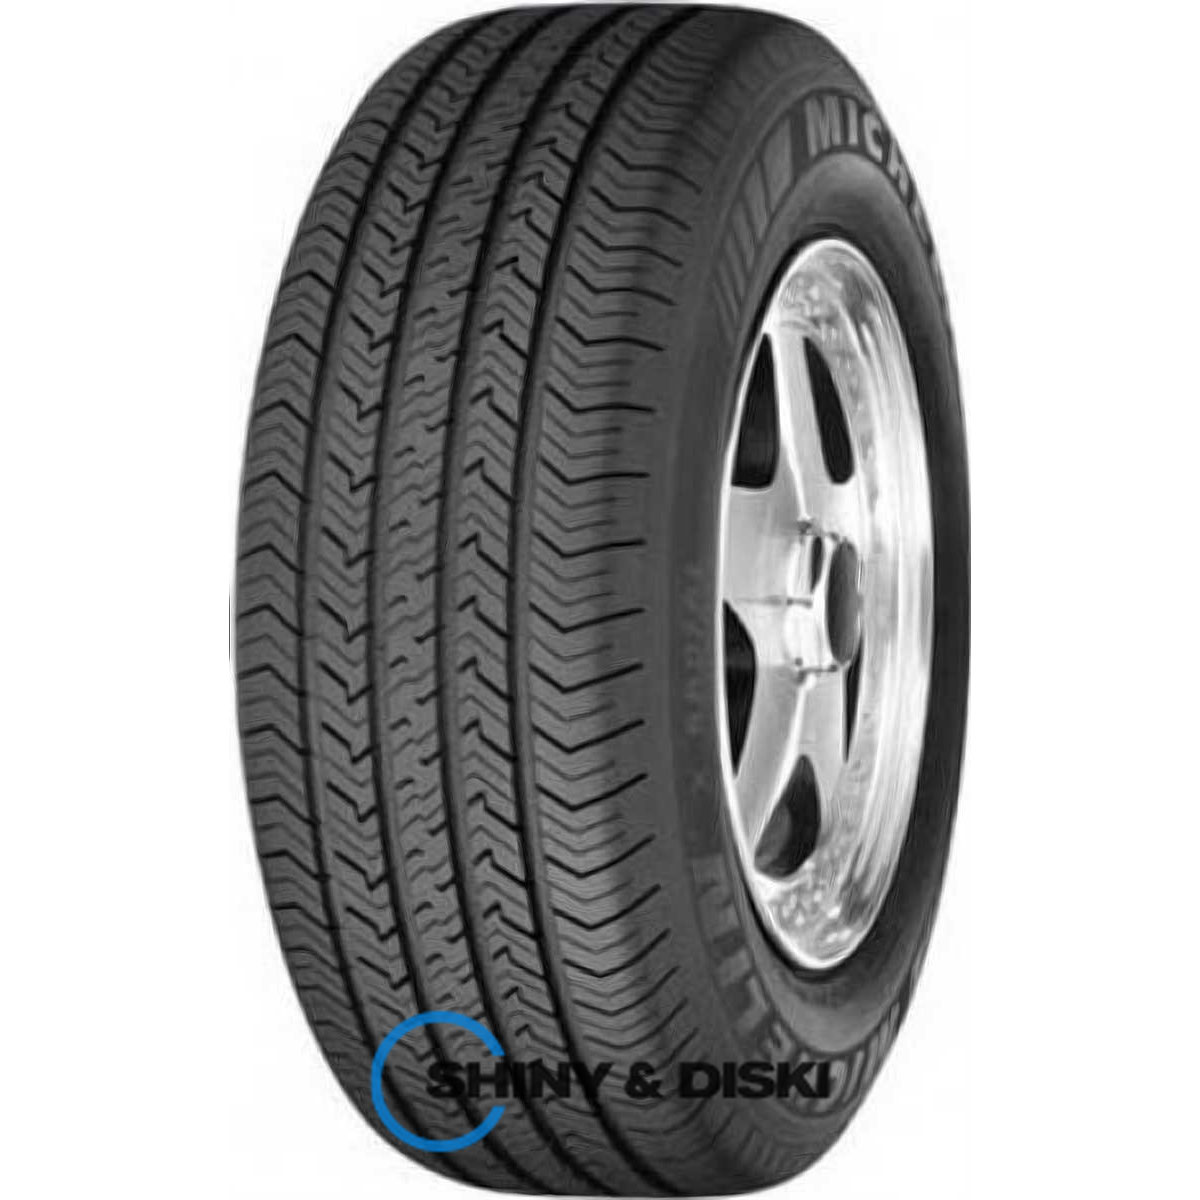 michelin x-radial dt 185/70 r14 87s